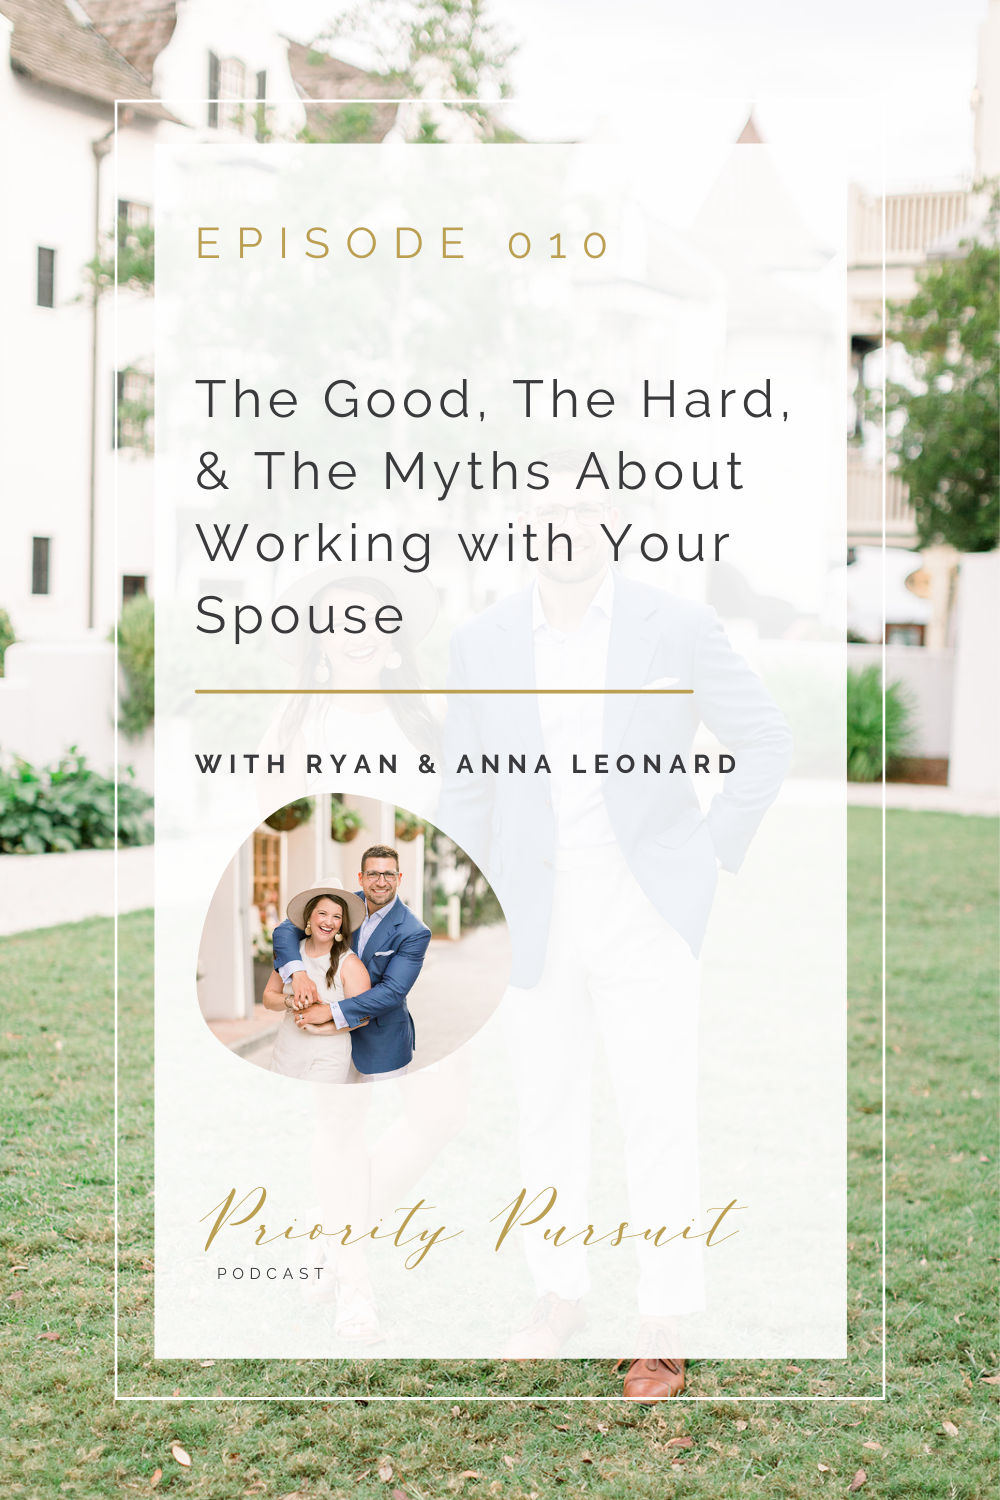 Destination wedding photographers Ryan and Anna Leonard share what running a business with your spouse is actually like in this episode of “The Priority Pursuit Podcast”!